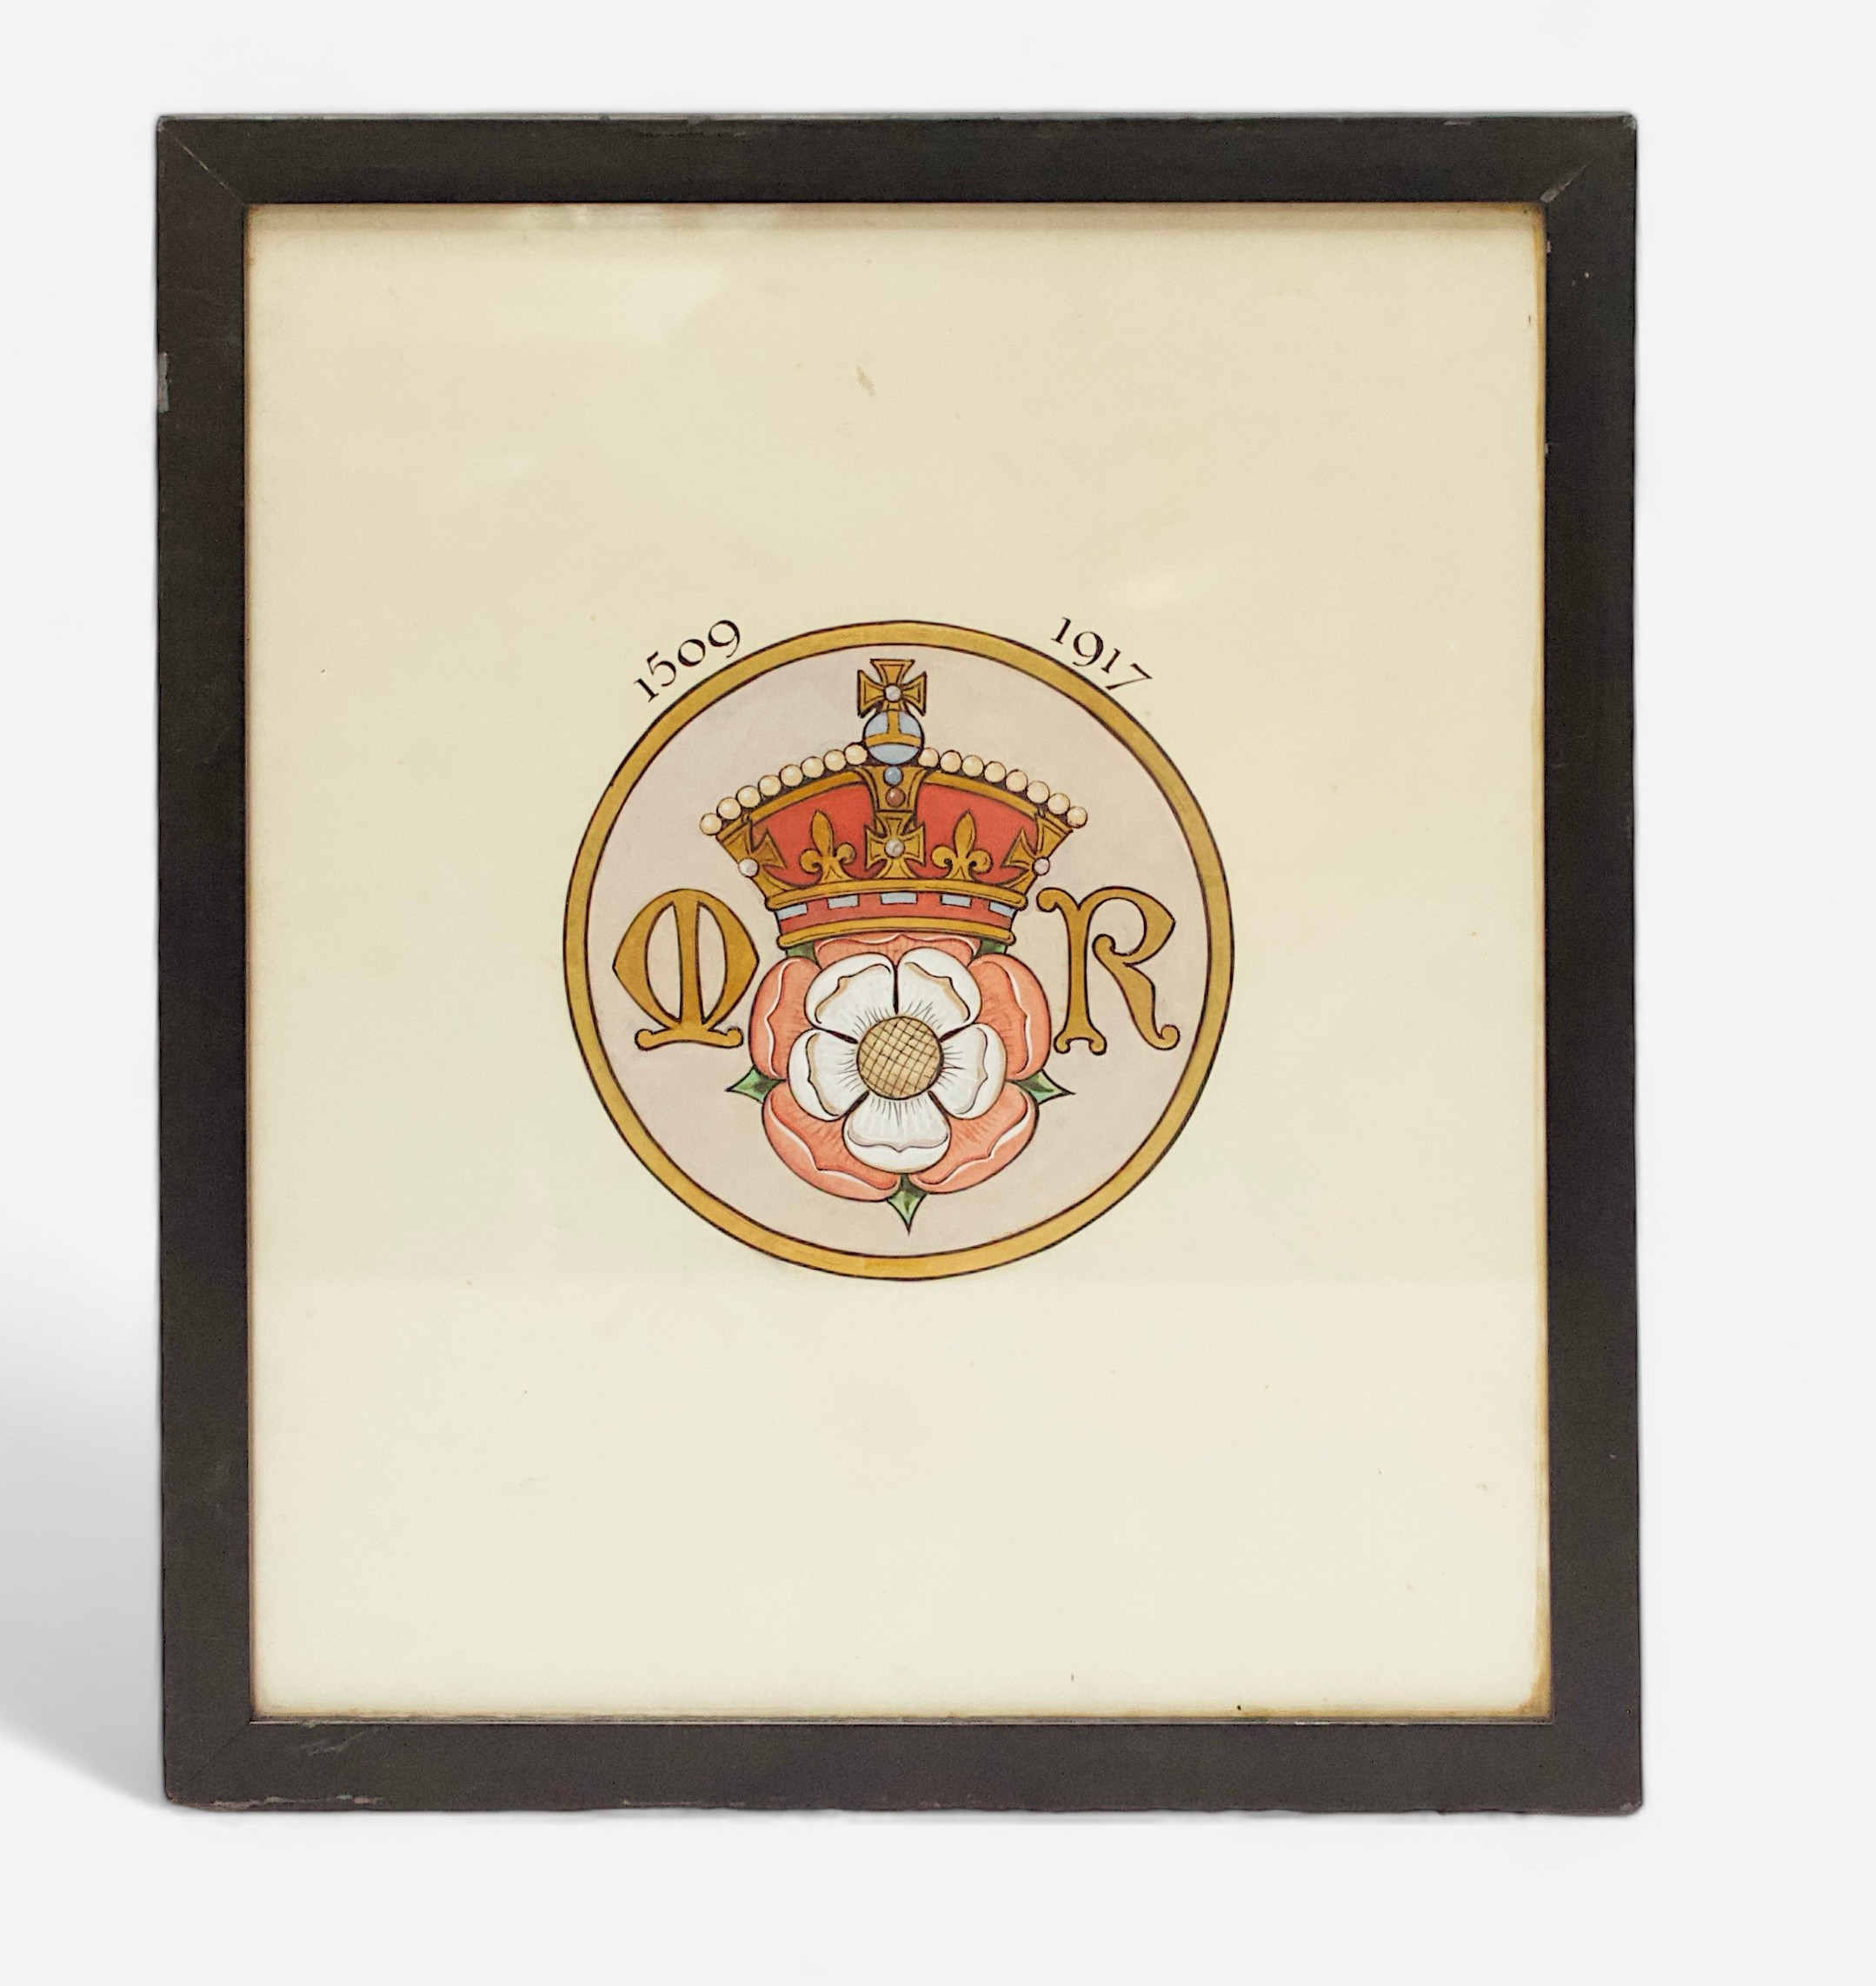 A hand-illuminated monogram of the Mary Rose, Flagship of Henry VIII's Navy. 31x26cm, crest 14cm